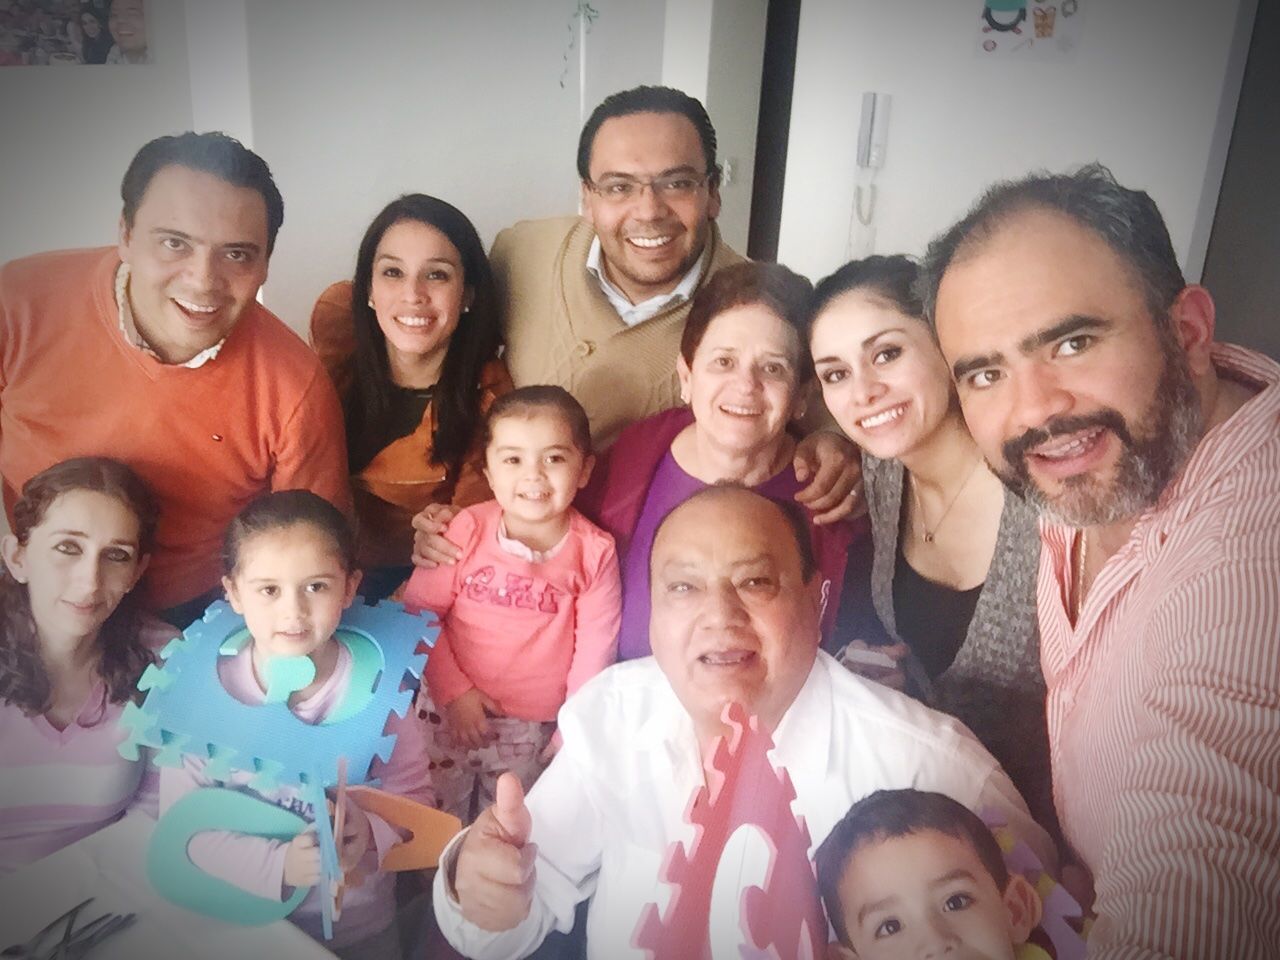 medium group of people, happiness, smiling, looking at camera, togetherness, casual clothing, mid adult men, home interior, boys, indoors, portrait, mature adult, real people, mature men, front view, senior adult, senior men, mid adult, sitting, mature women, senior women, lifestyles, grandfather, men, girls, standing, enjoyment, childhood, young men, love, fun, young adult, father, son, cheerful, celebration, bonding, eyeglasses, young women, granddaughter, day, women, friendship, adult, people